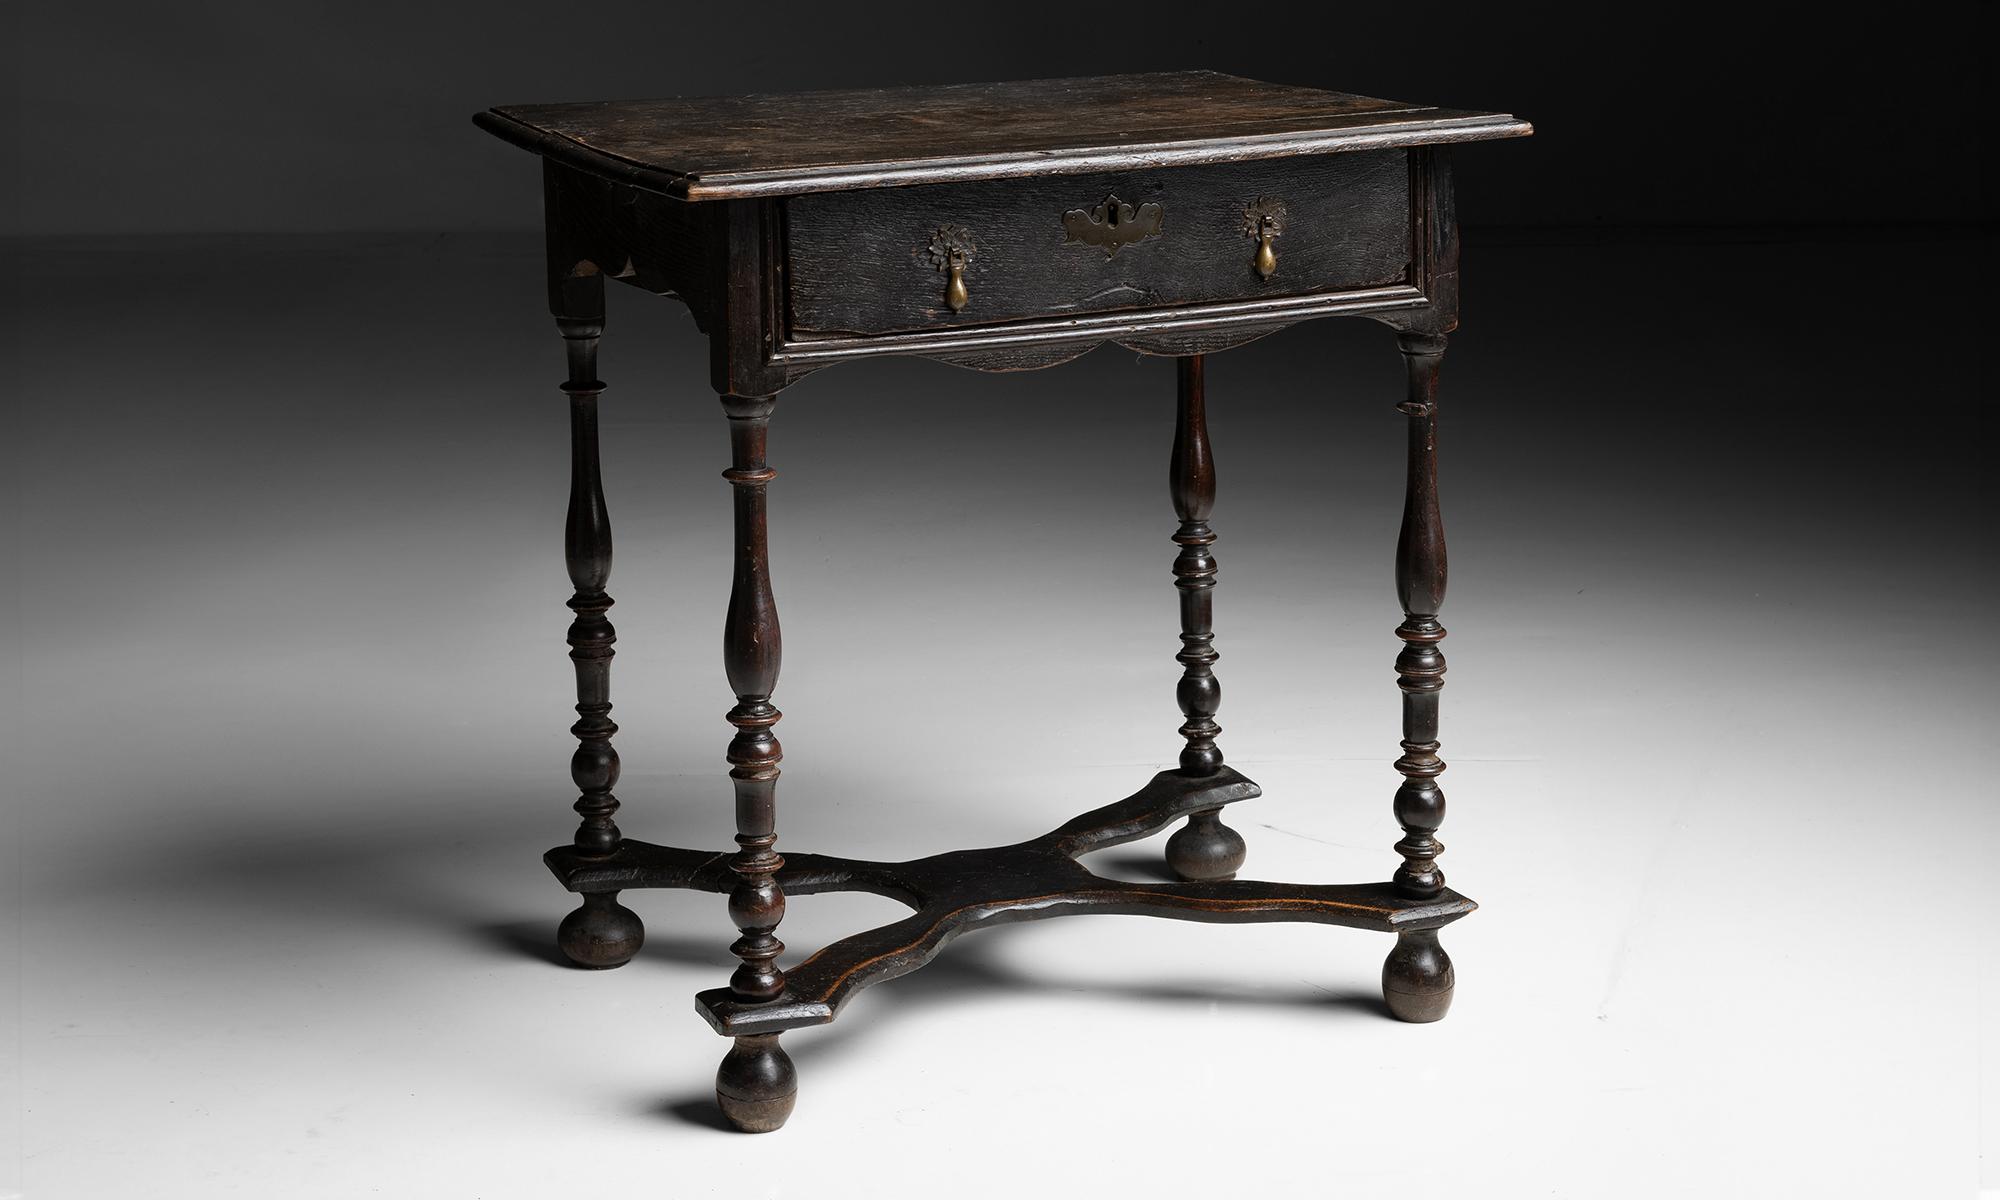 Ebonised Side Table

England circa 1680

Ebonised oak side table with turned legs and brass hardware.

27.25”w x 21.5”d x 28.75”h